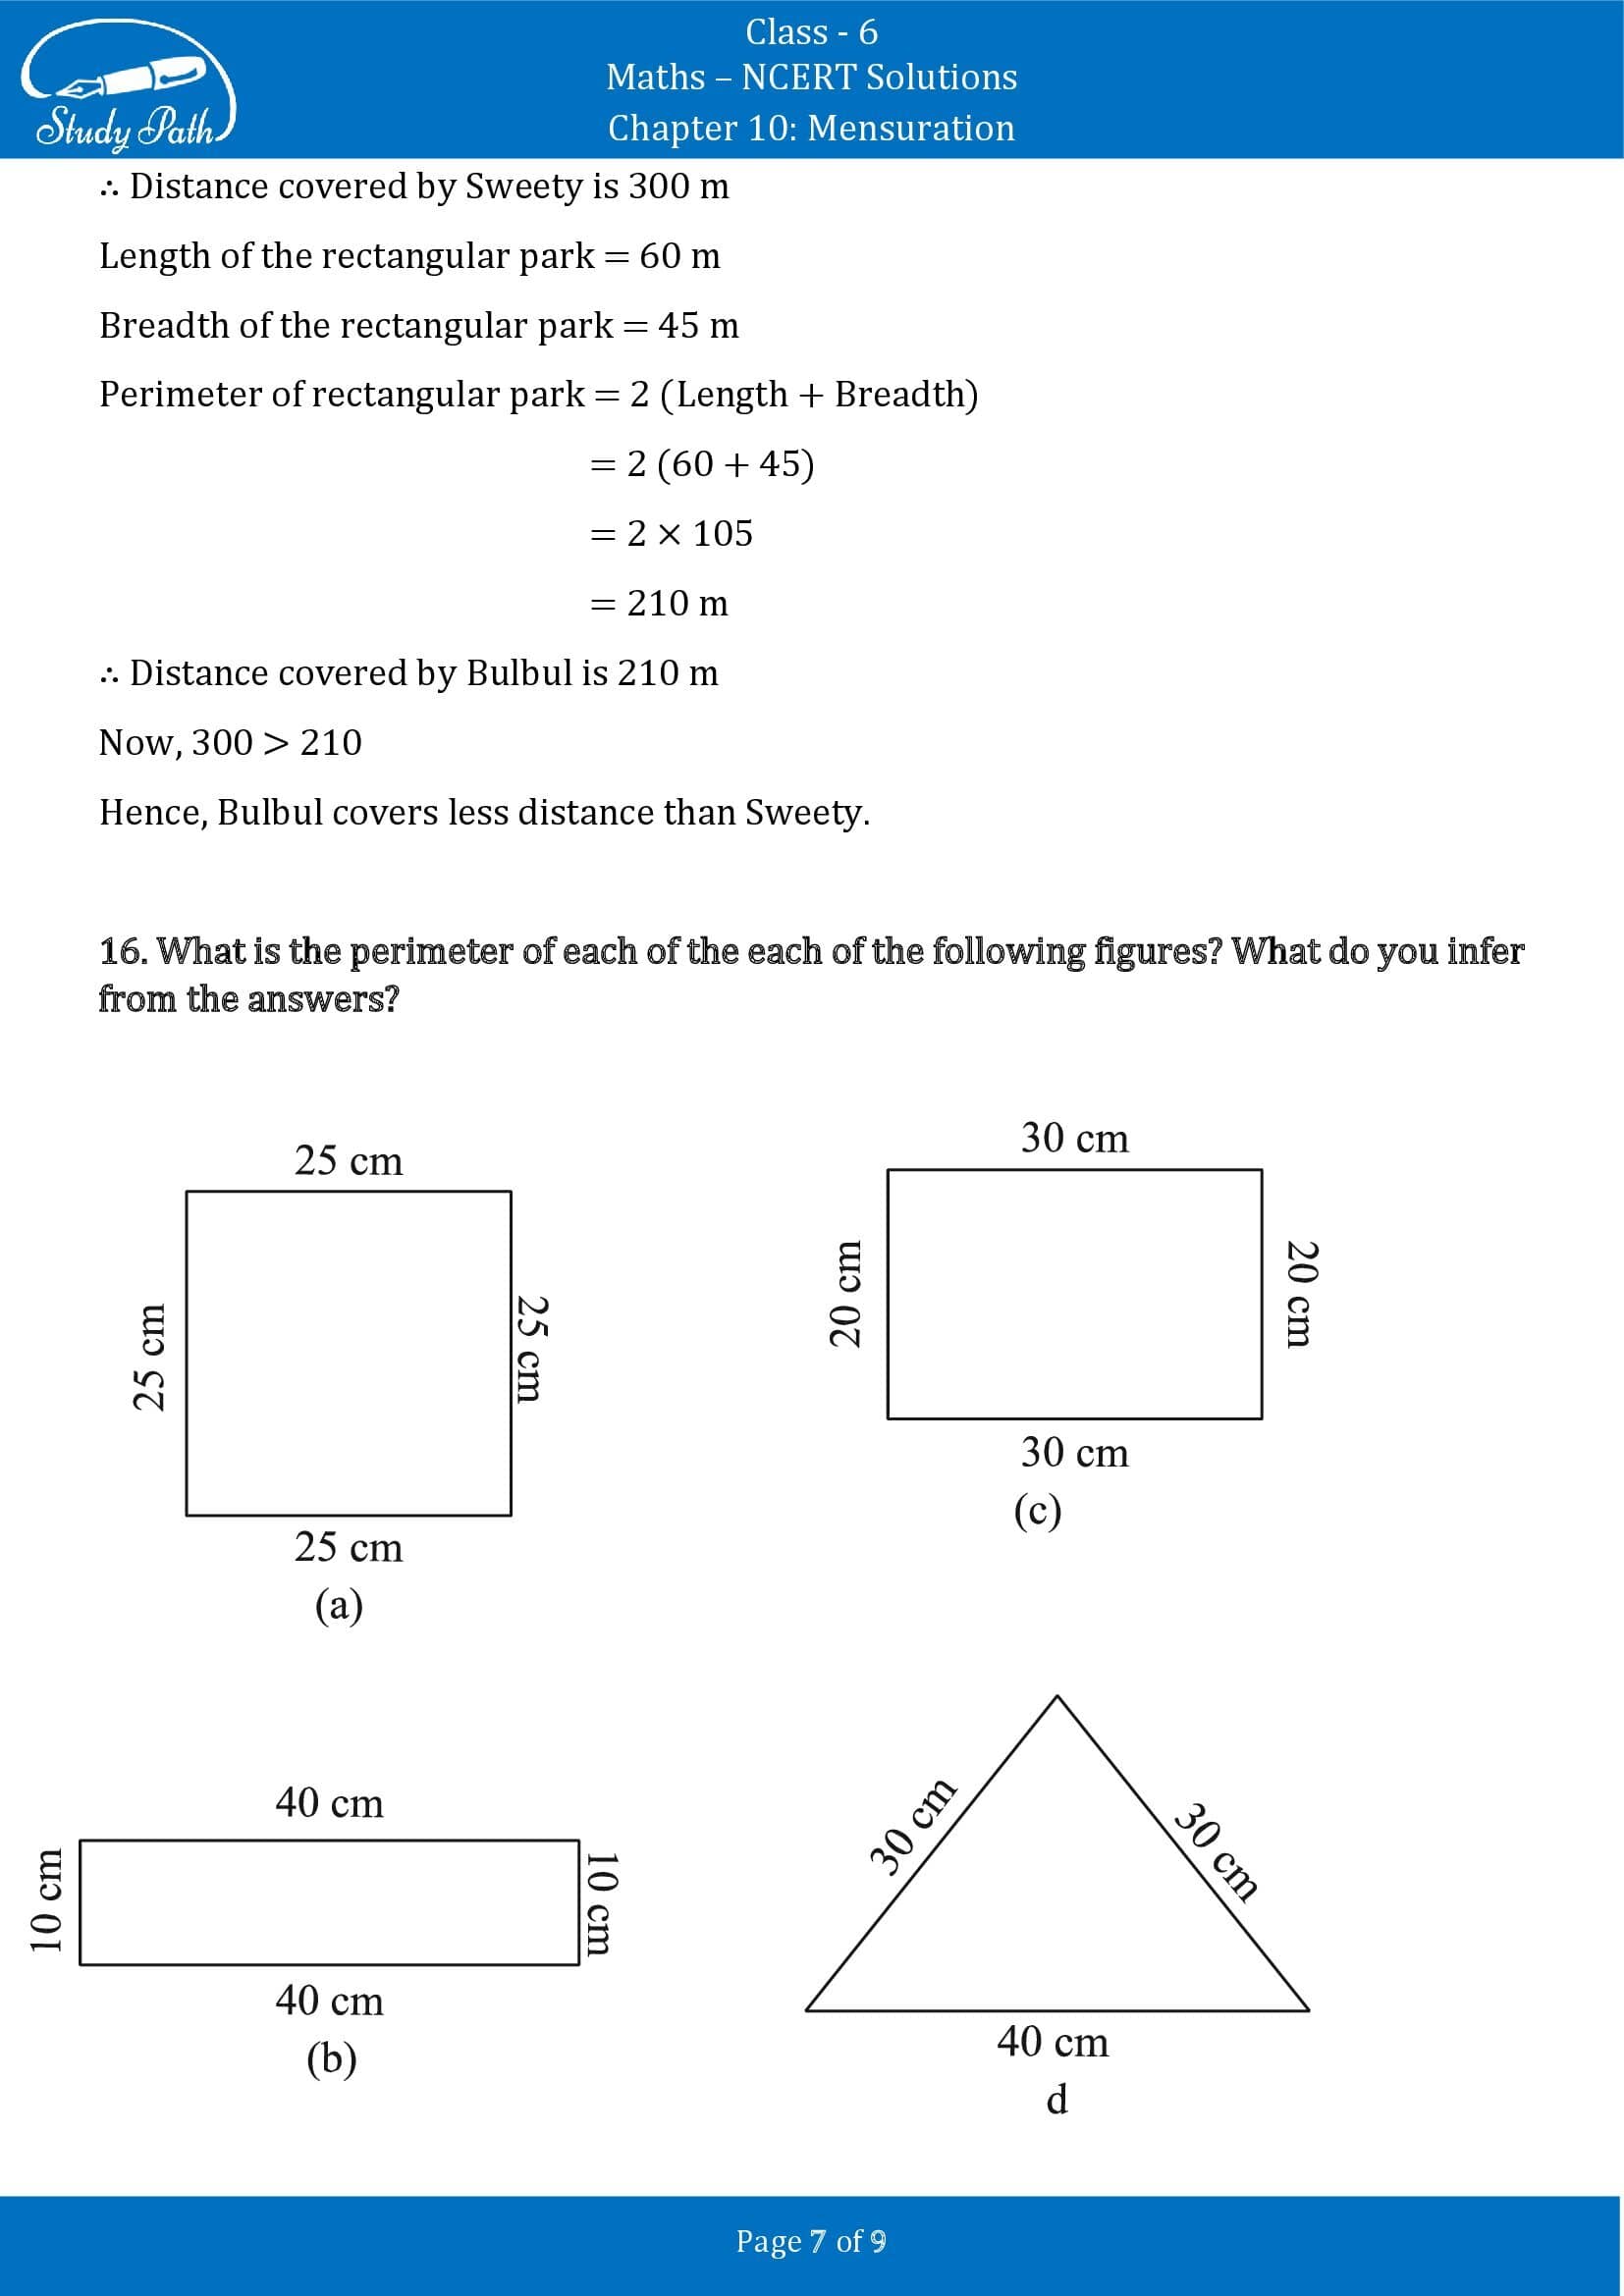 NCERT Solutions for Class 6 Maths Chapter 10 Mensuration Exercise 10.1 00007